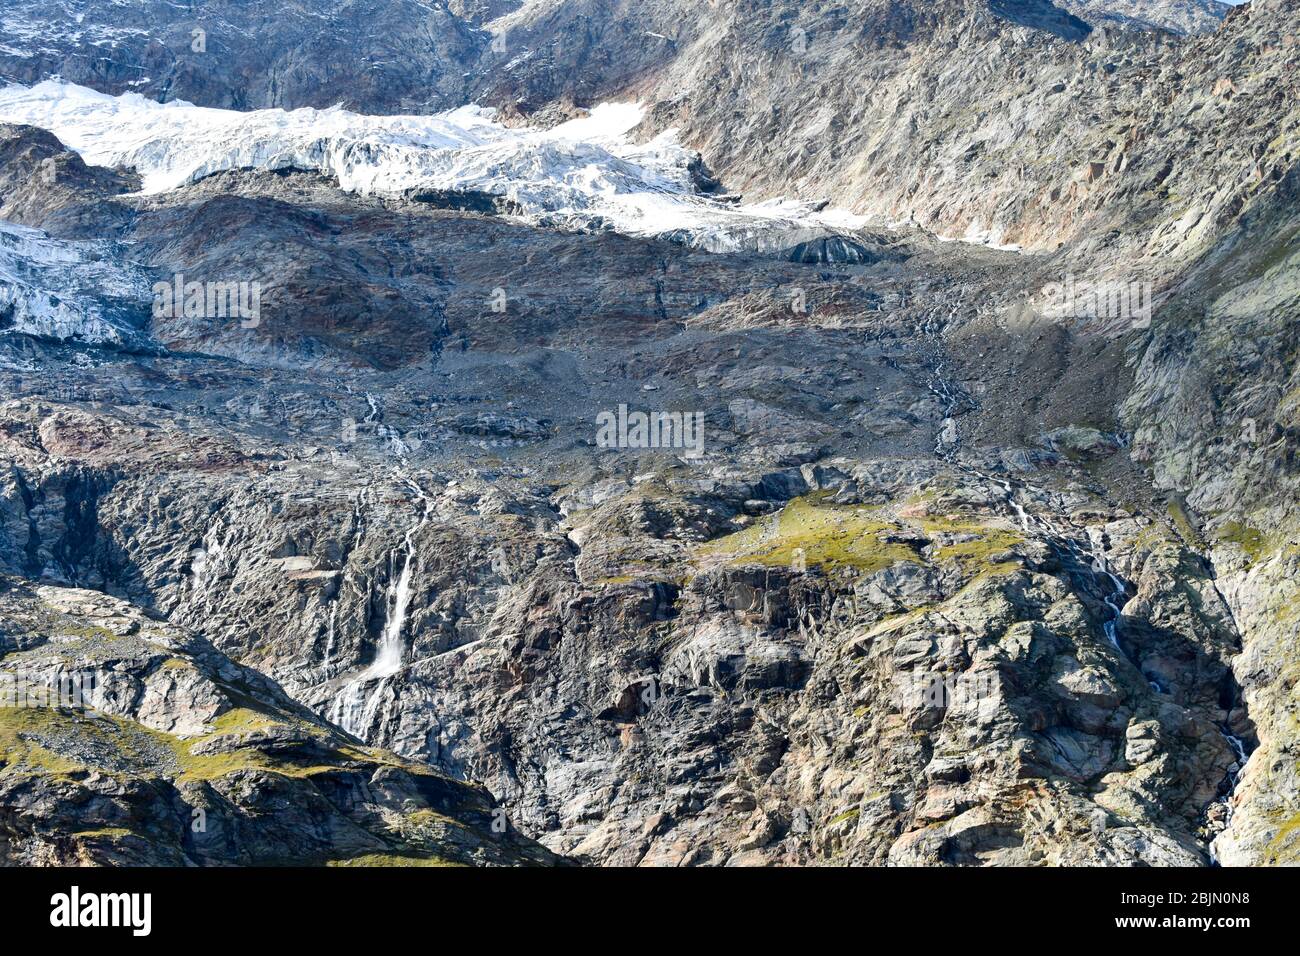 Intensive glacier melting as result of global warming. Stock Photo